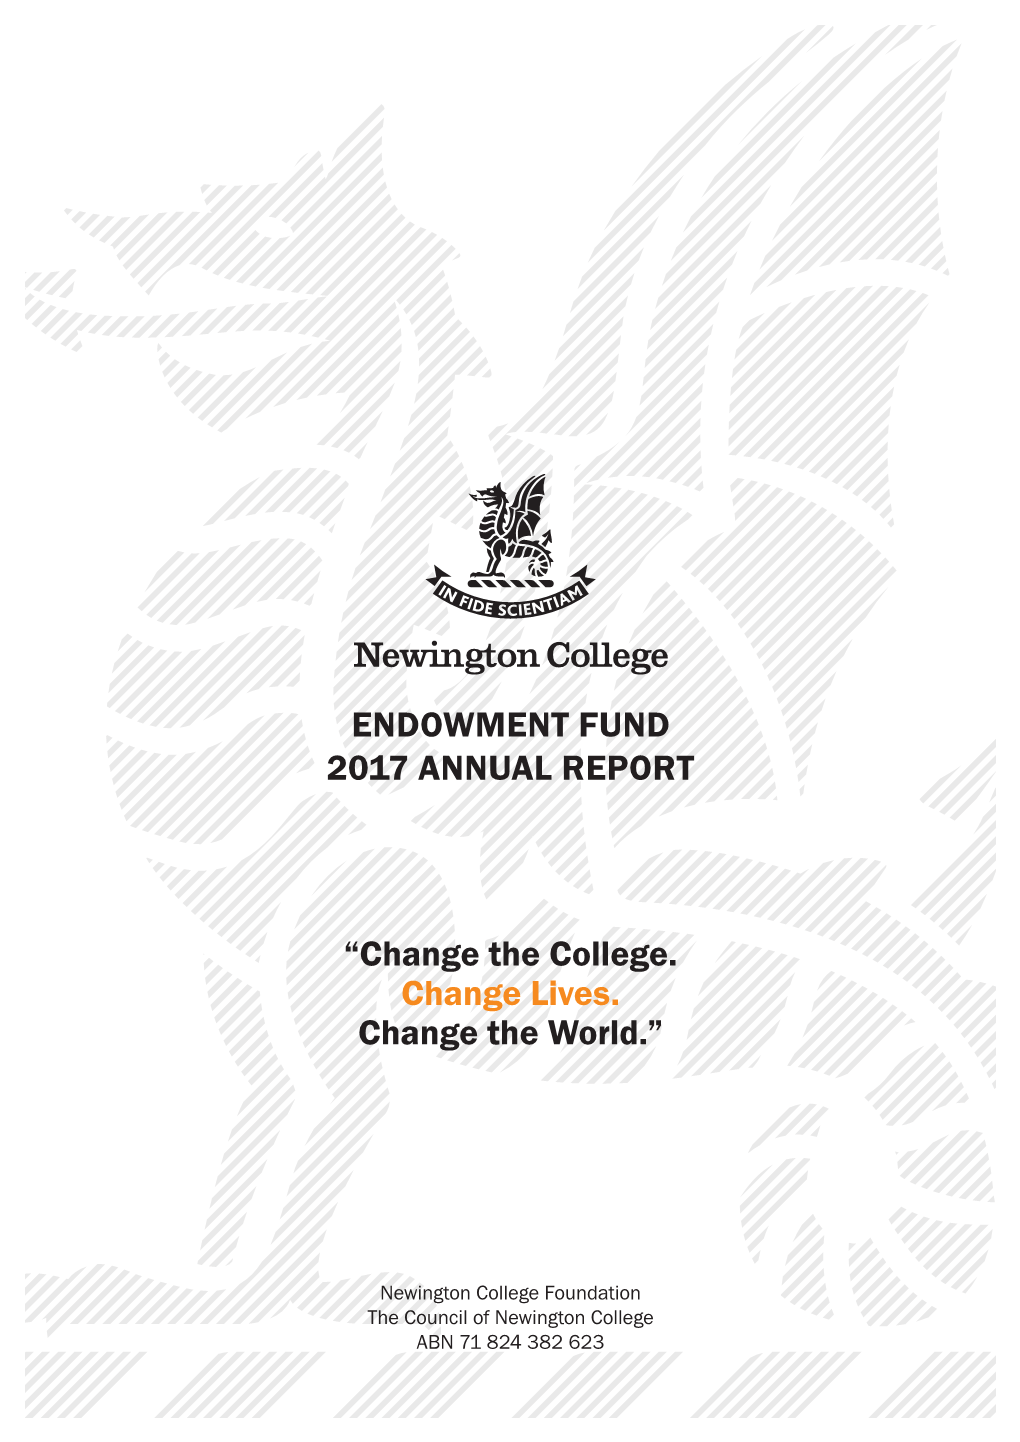 Endowment Fund 2017 Annual Report